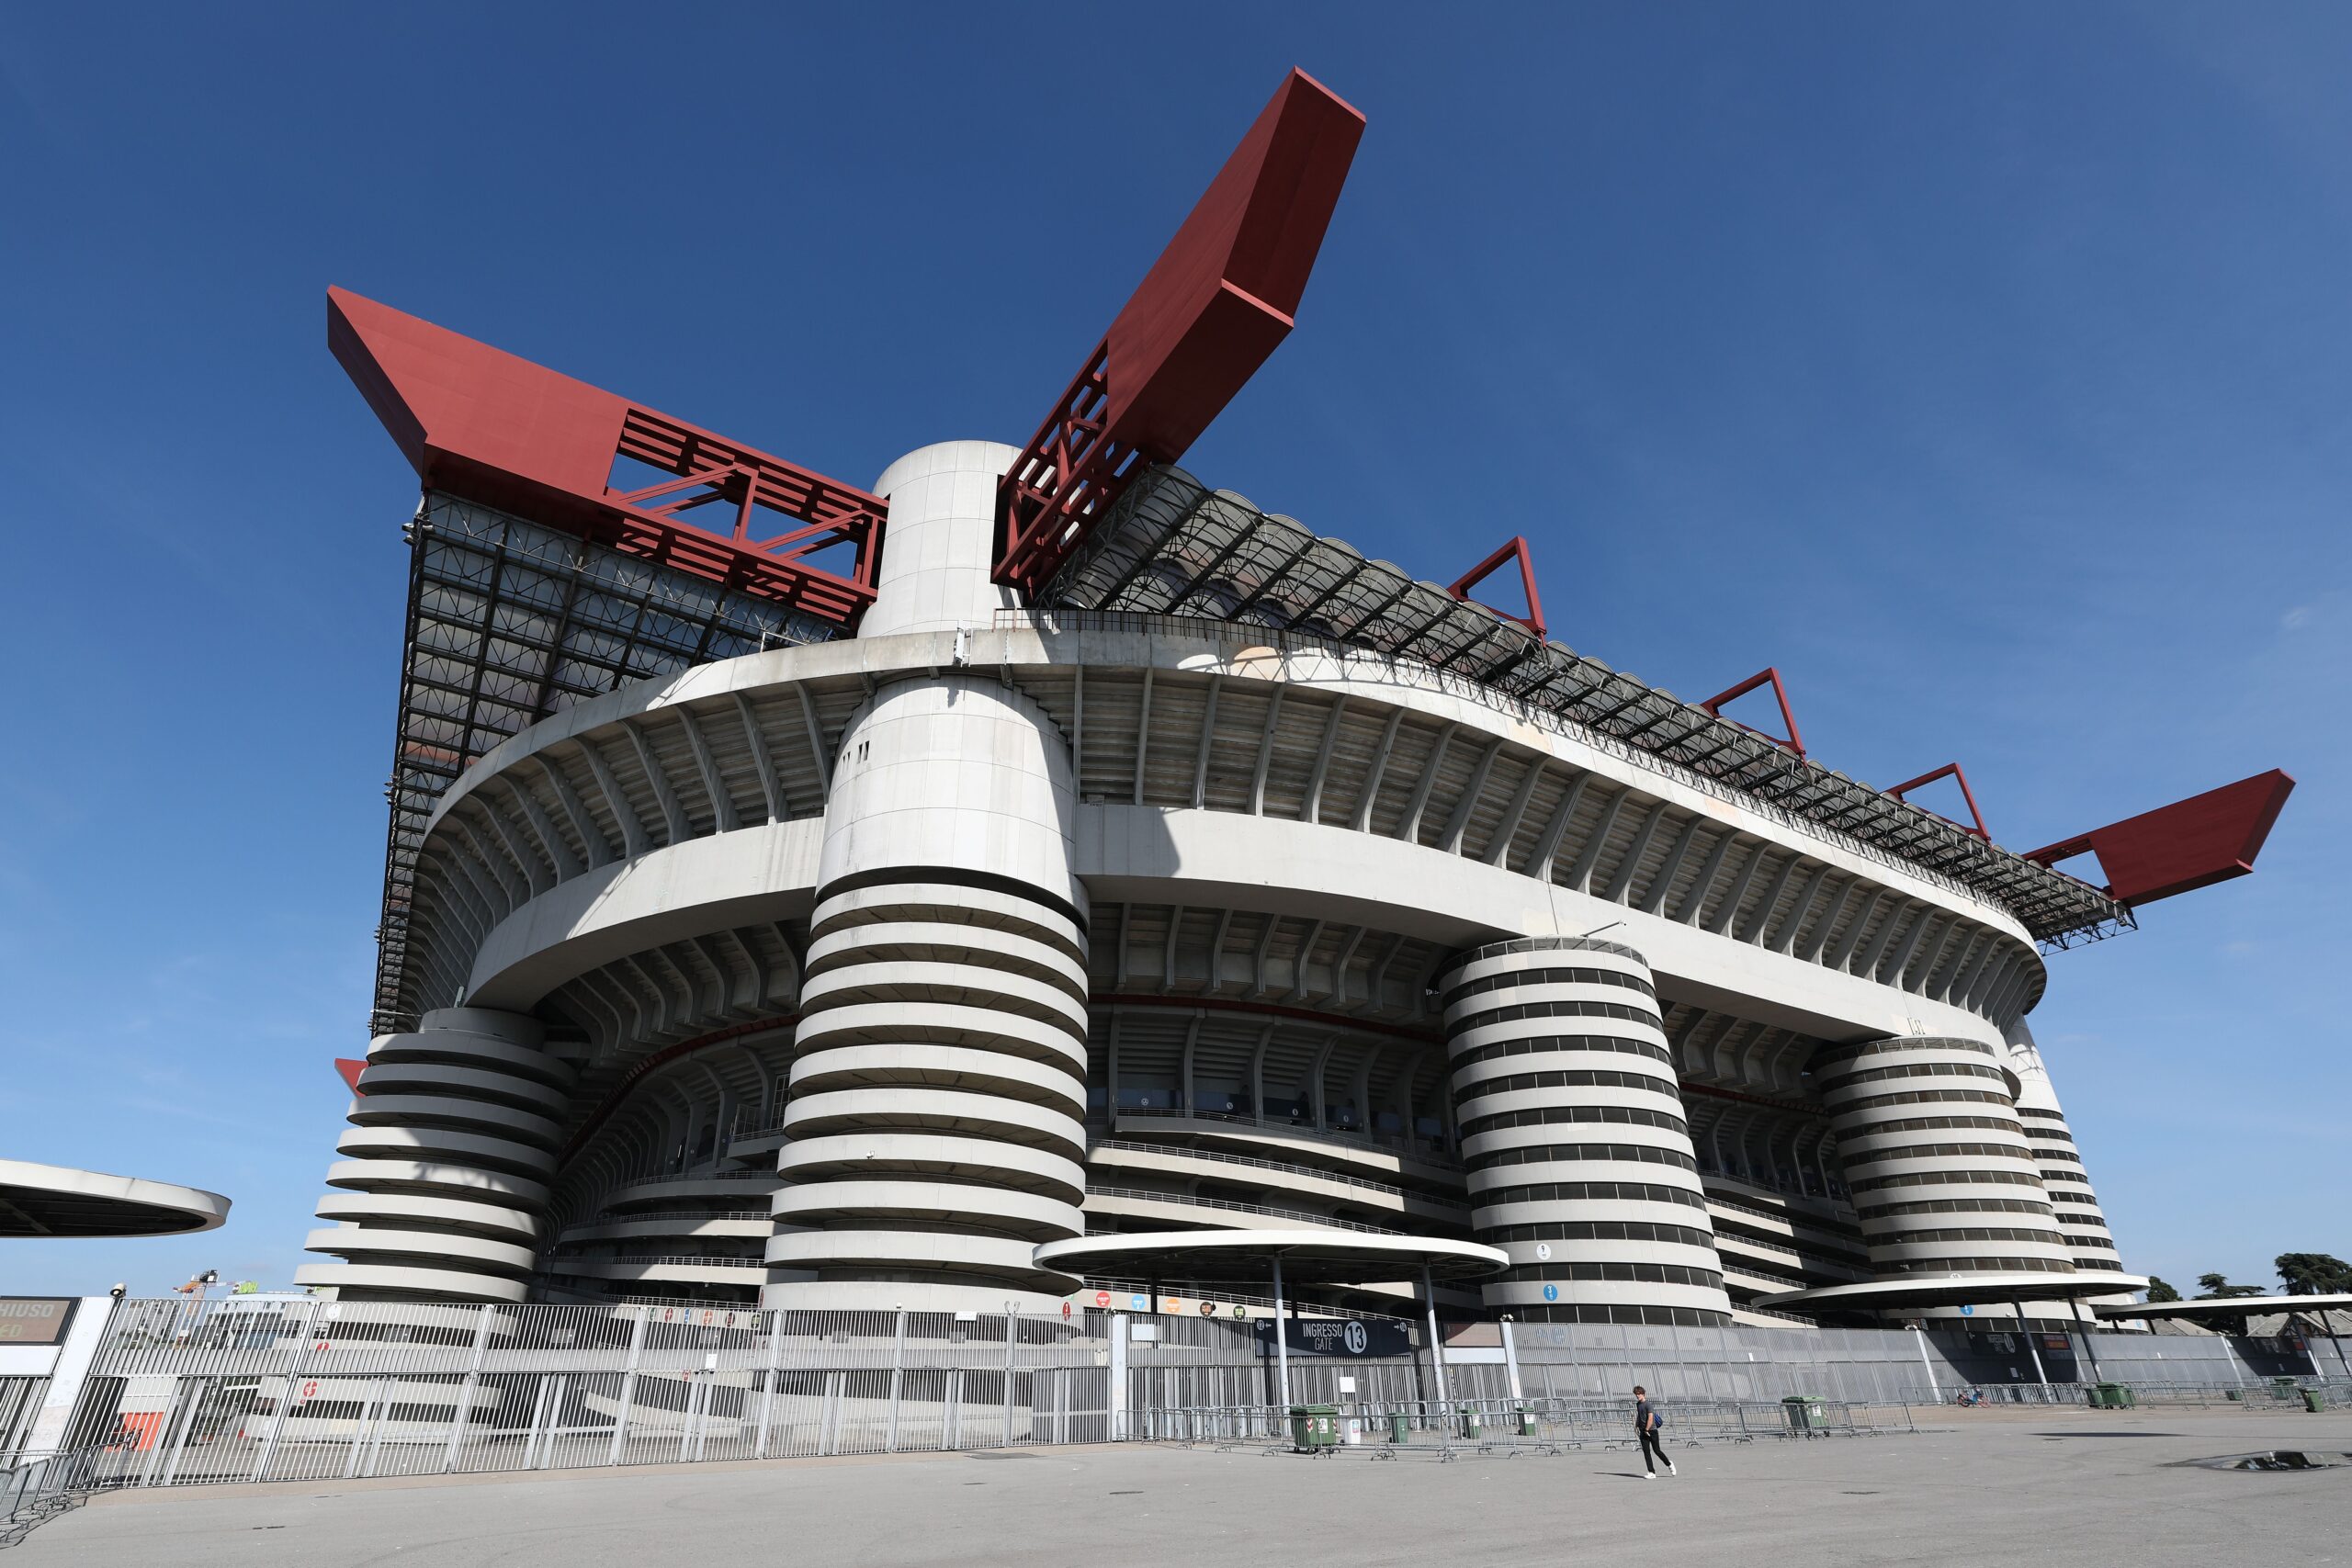 from San Siro

Stay updated with the latest news and updates from the Milan vs Udinese match in Serie A at San Siro.